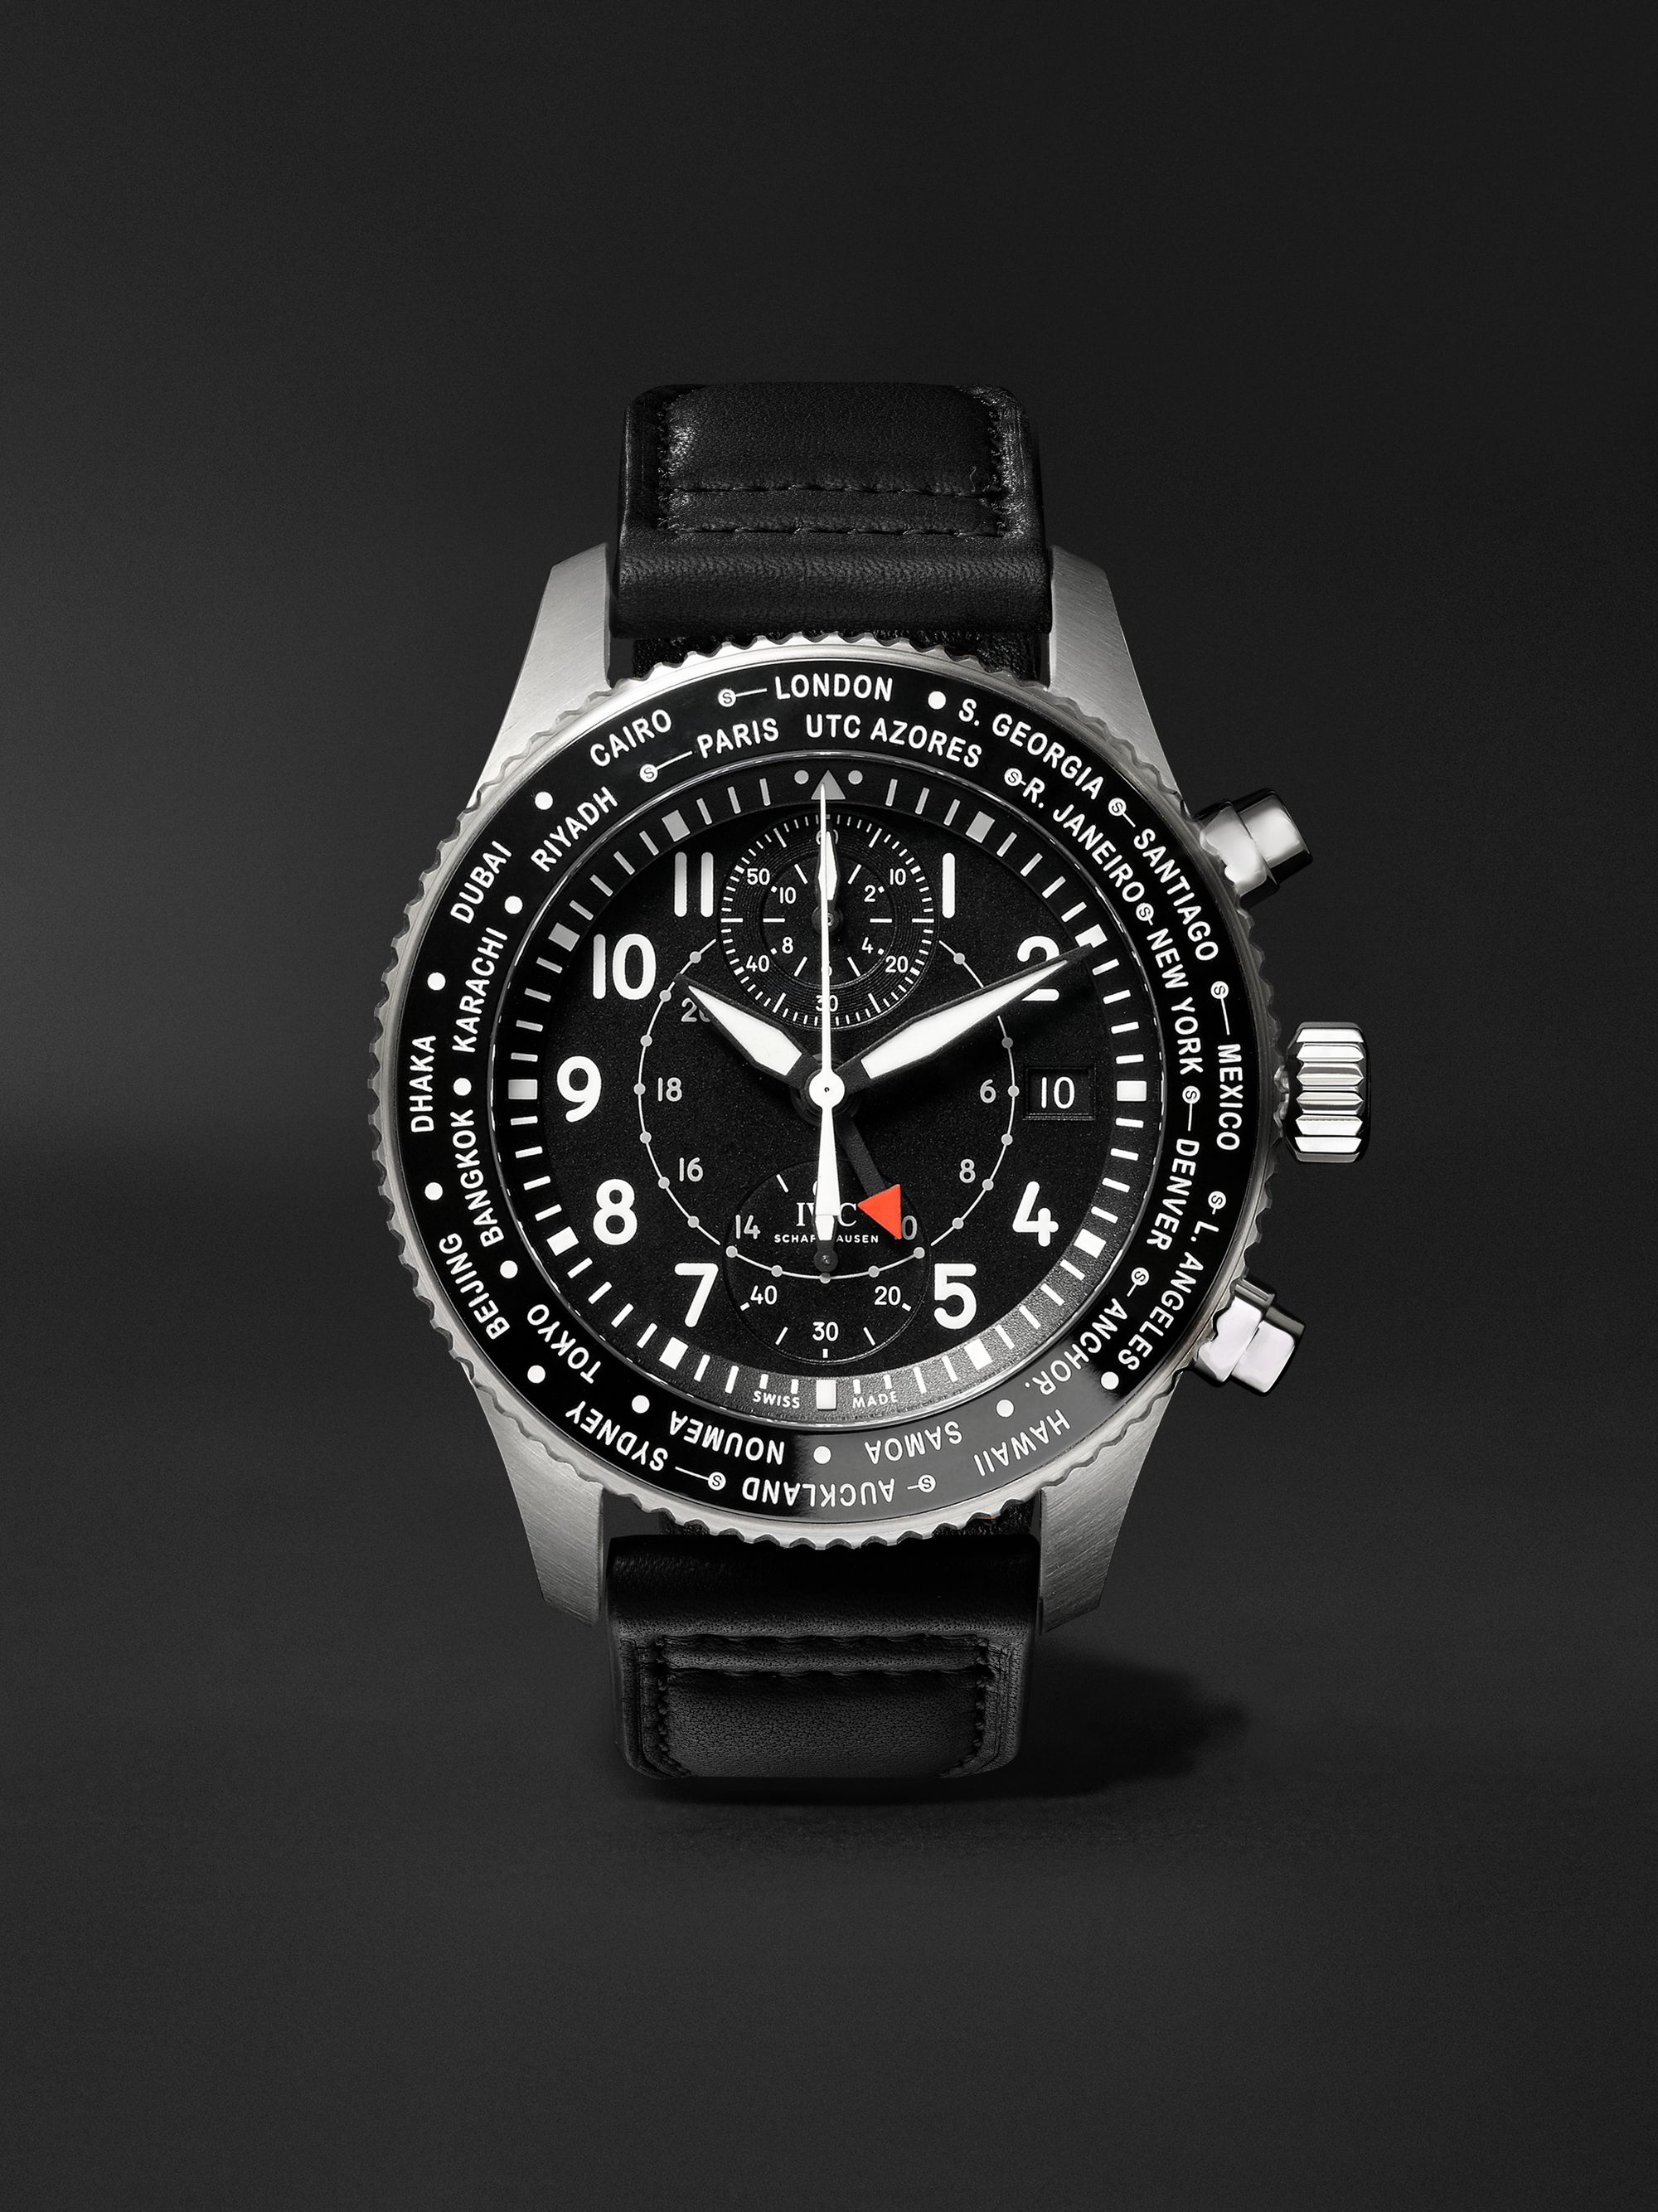 IWC SCHAFFHAUSEN Pilot's Timezoner Automatic Chronograph 46mm Stainless Steel and Leather Watch, Ref. No. IW395001